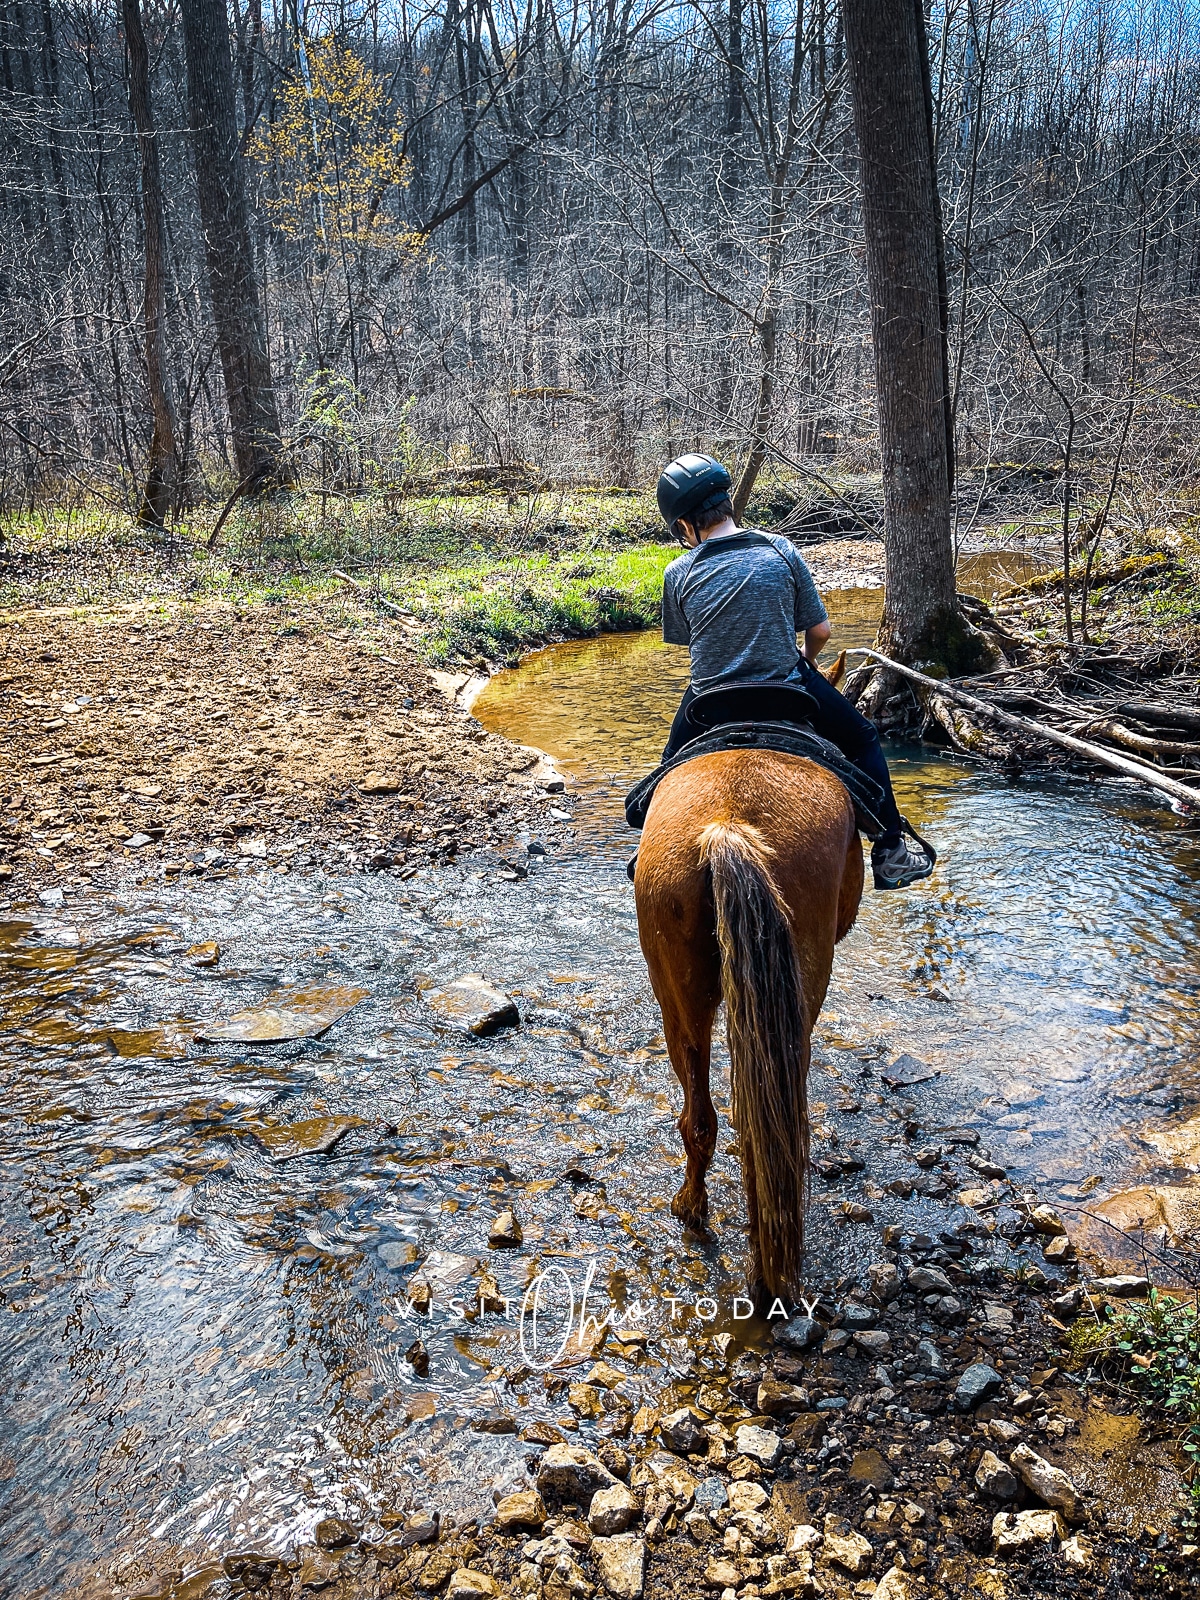 male with grey shirt and black helmet on a brown horse in the woods crossing a stream. Photo credit: Cindy Gordon of VisitOhioToday.com